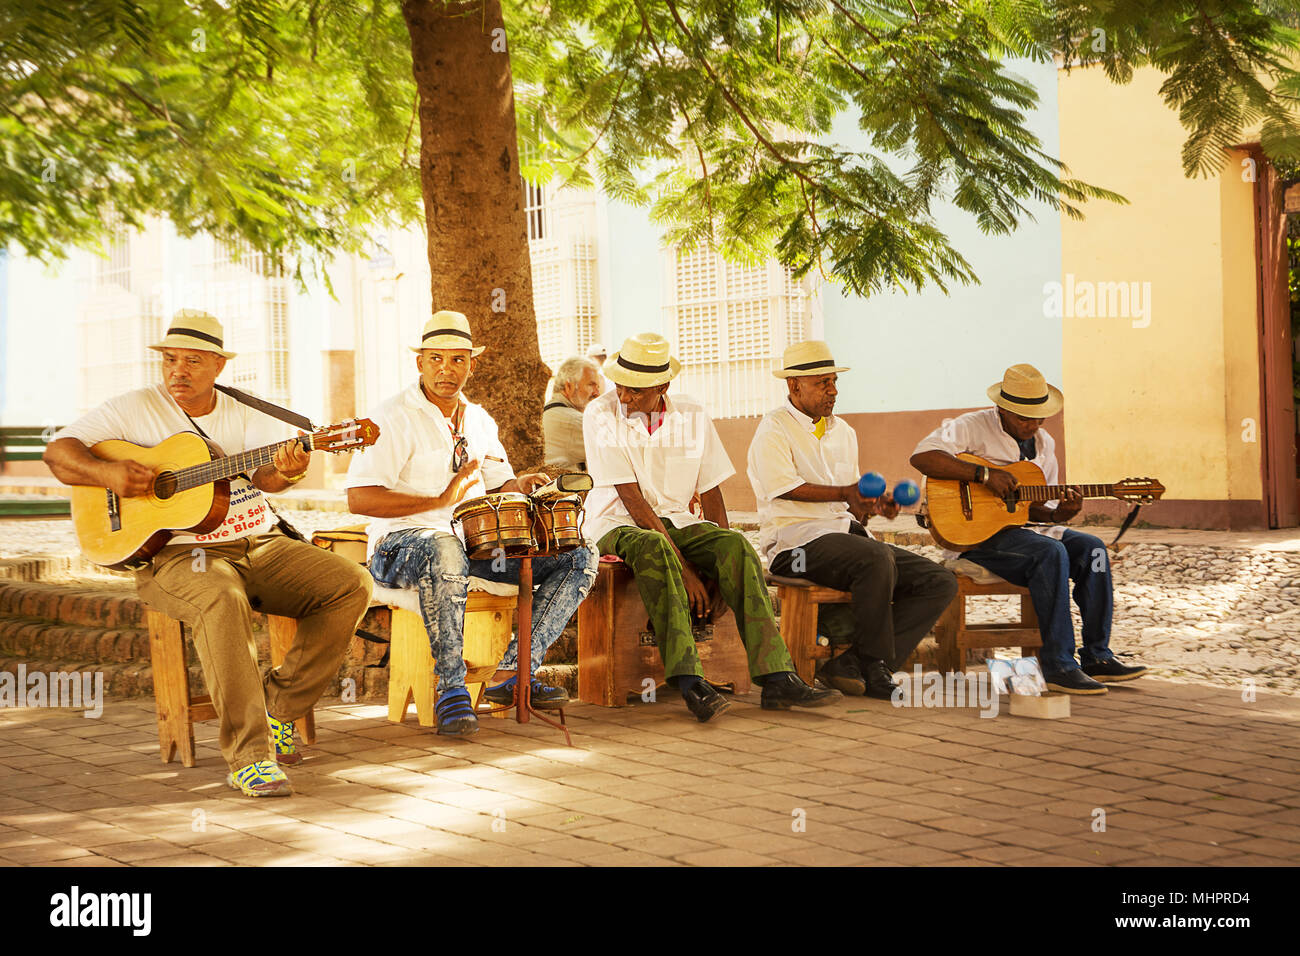 Trinidad, Cuba - 8 december 2017: Musical group that plays Cuban music in the square Stock Photo